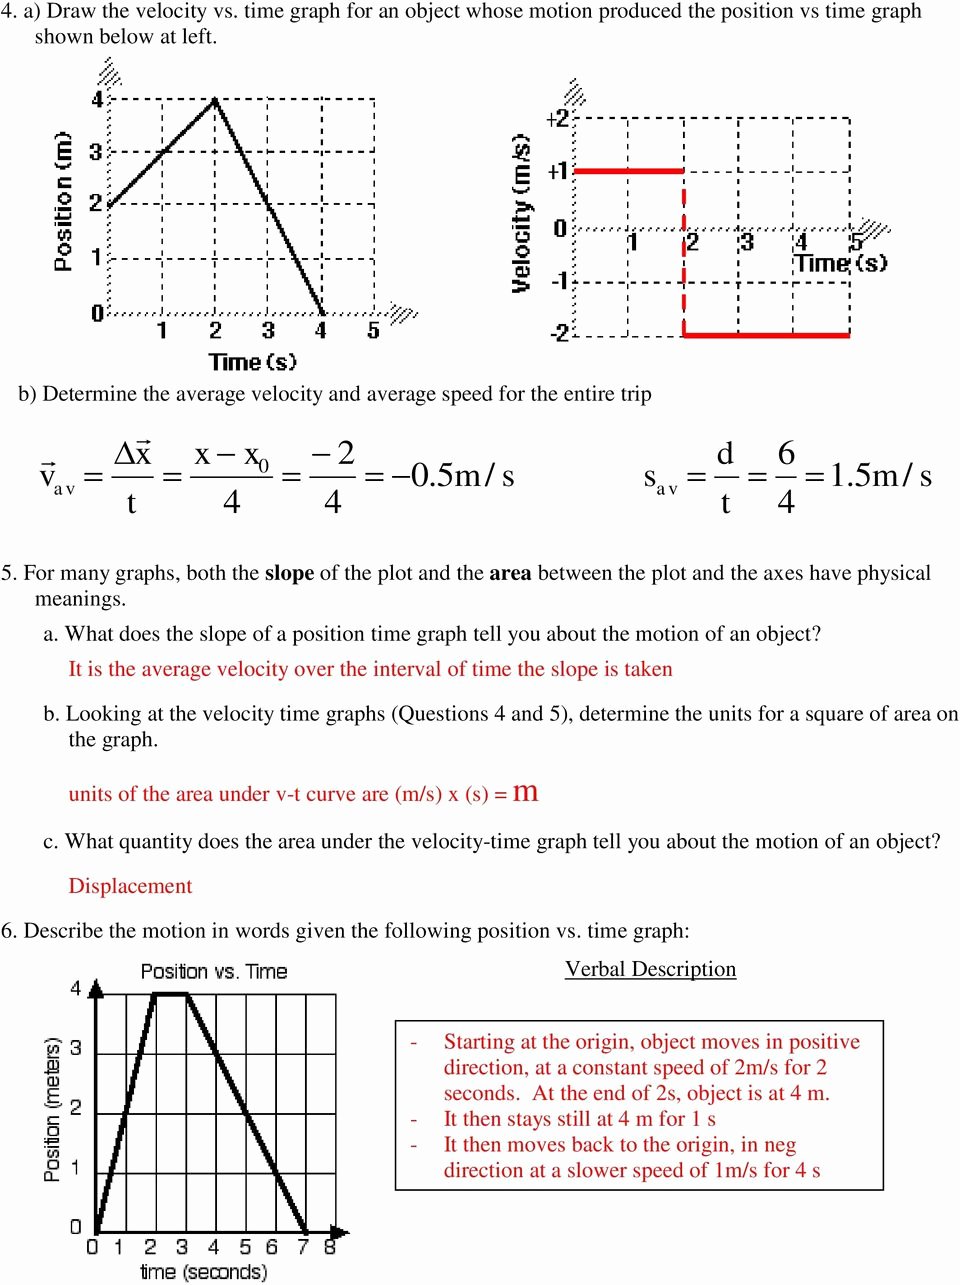 Velocity Time Graph Worksheet Answers Inspirational Unit 2 Kinematics Worksheet 1 Position Vs Time and